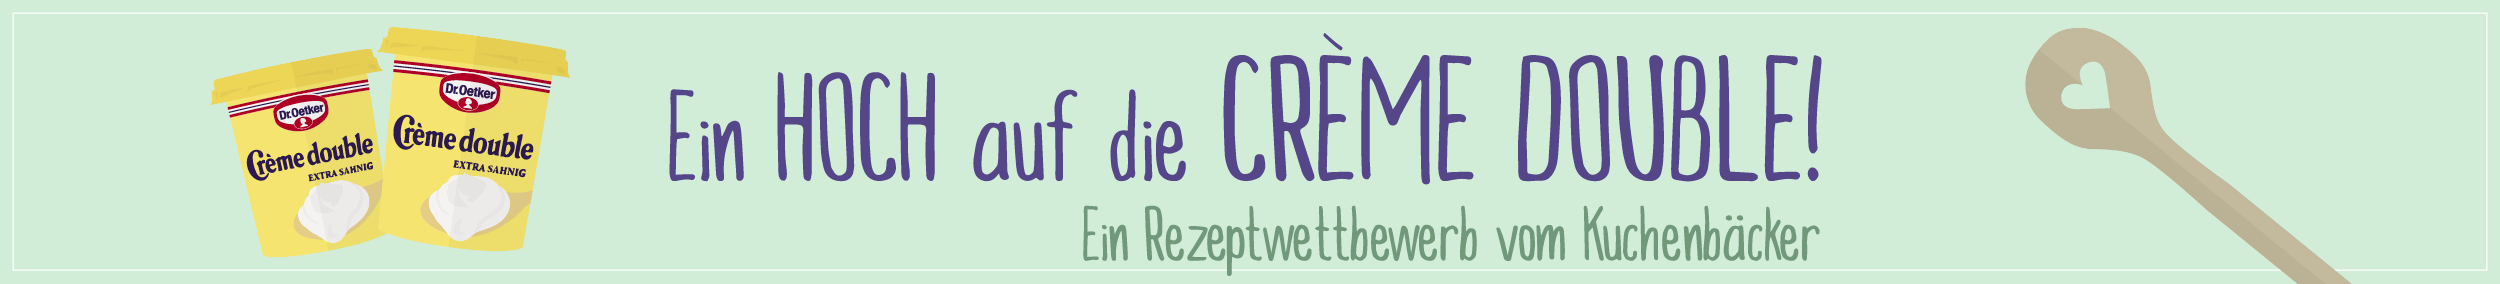 banner_creme_double_blogger_600x68px